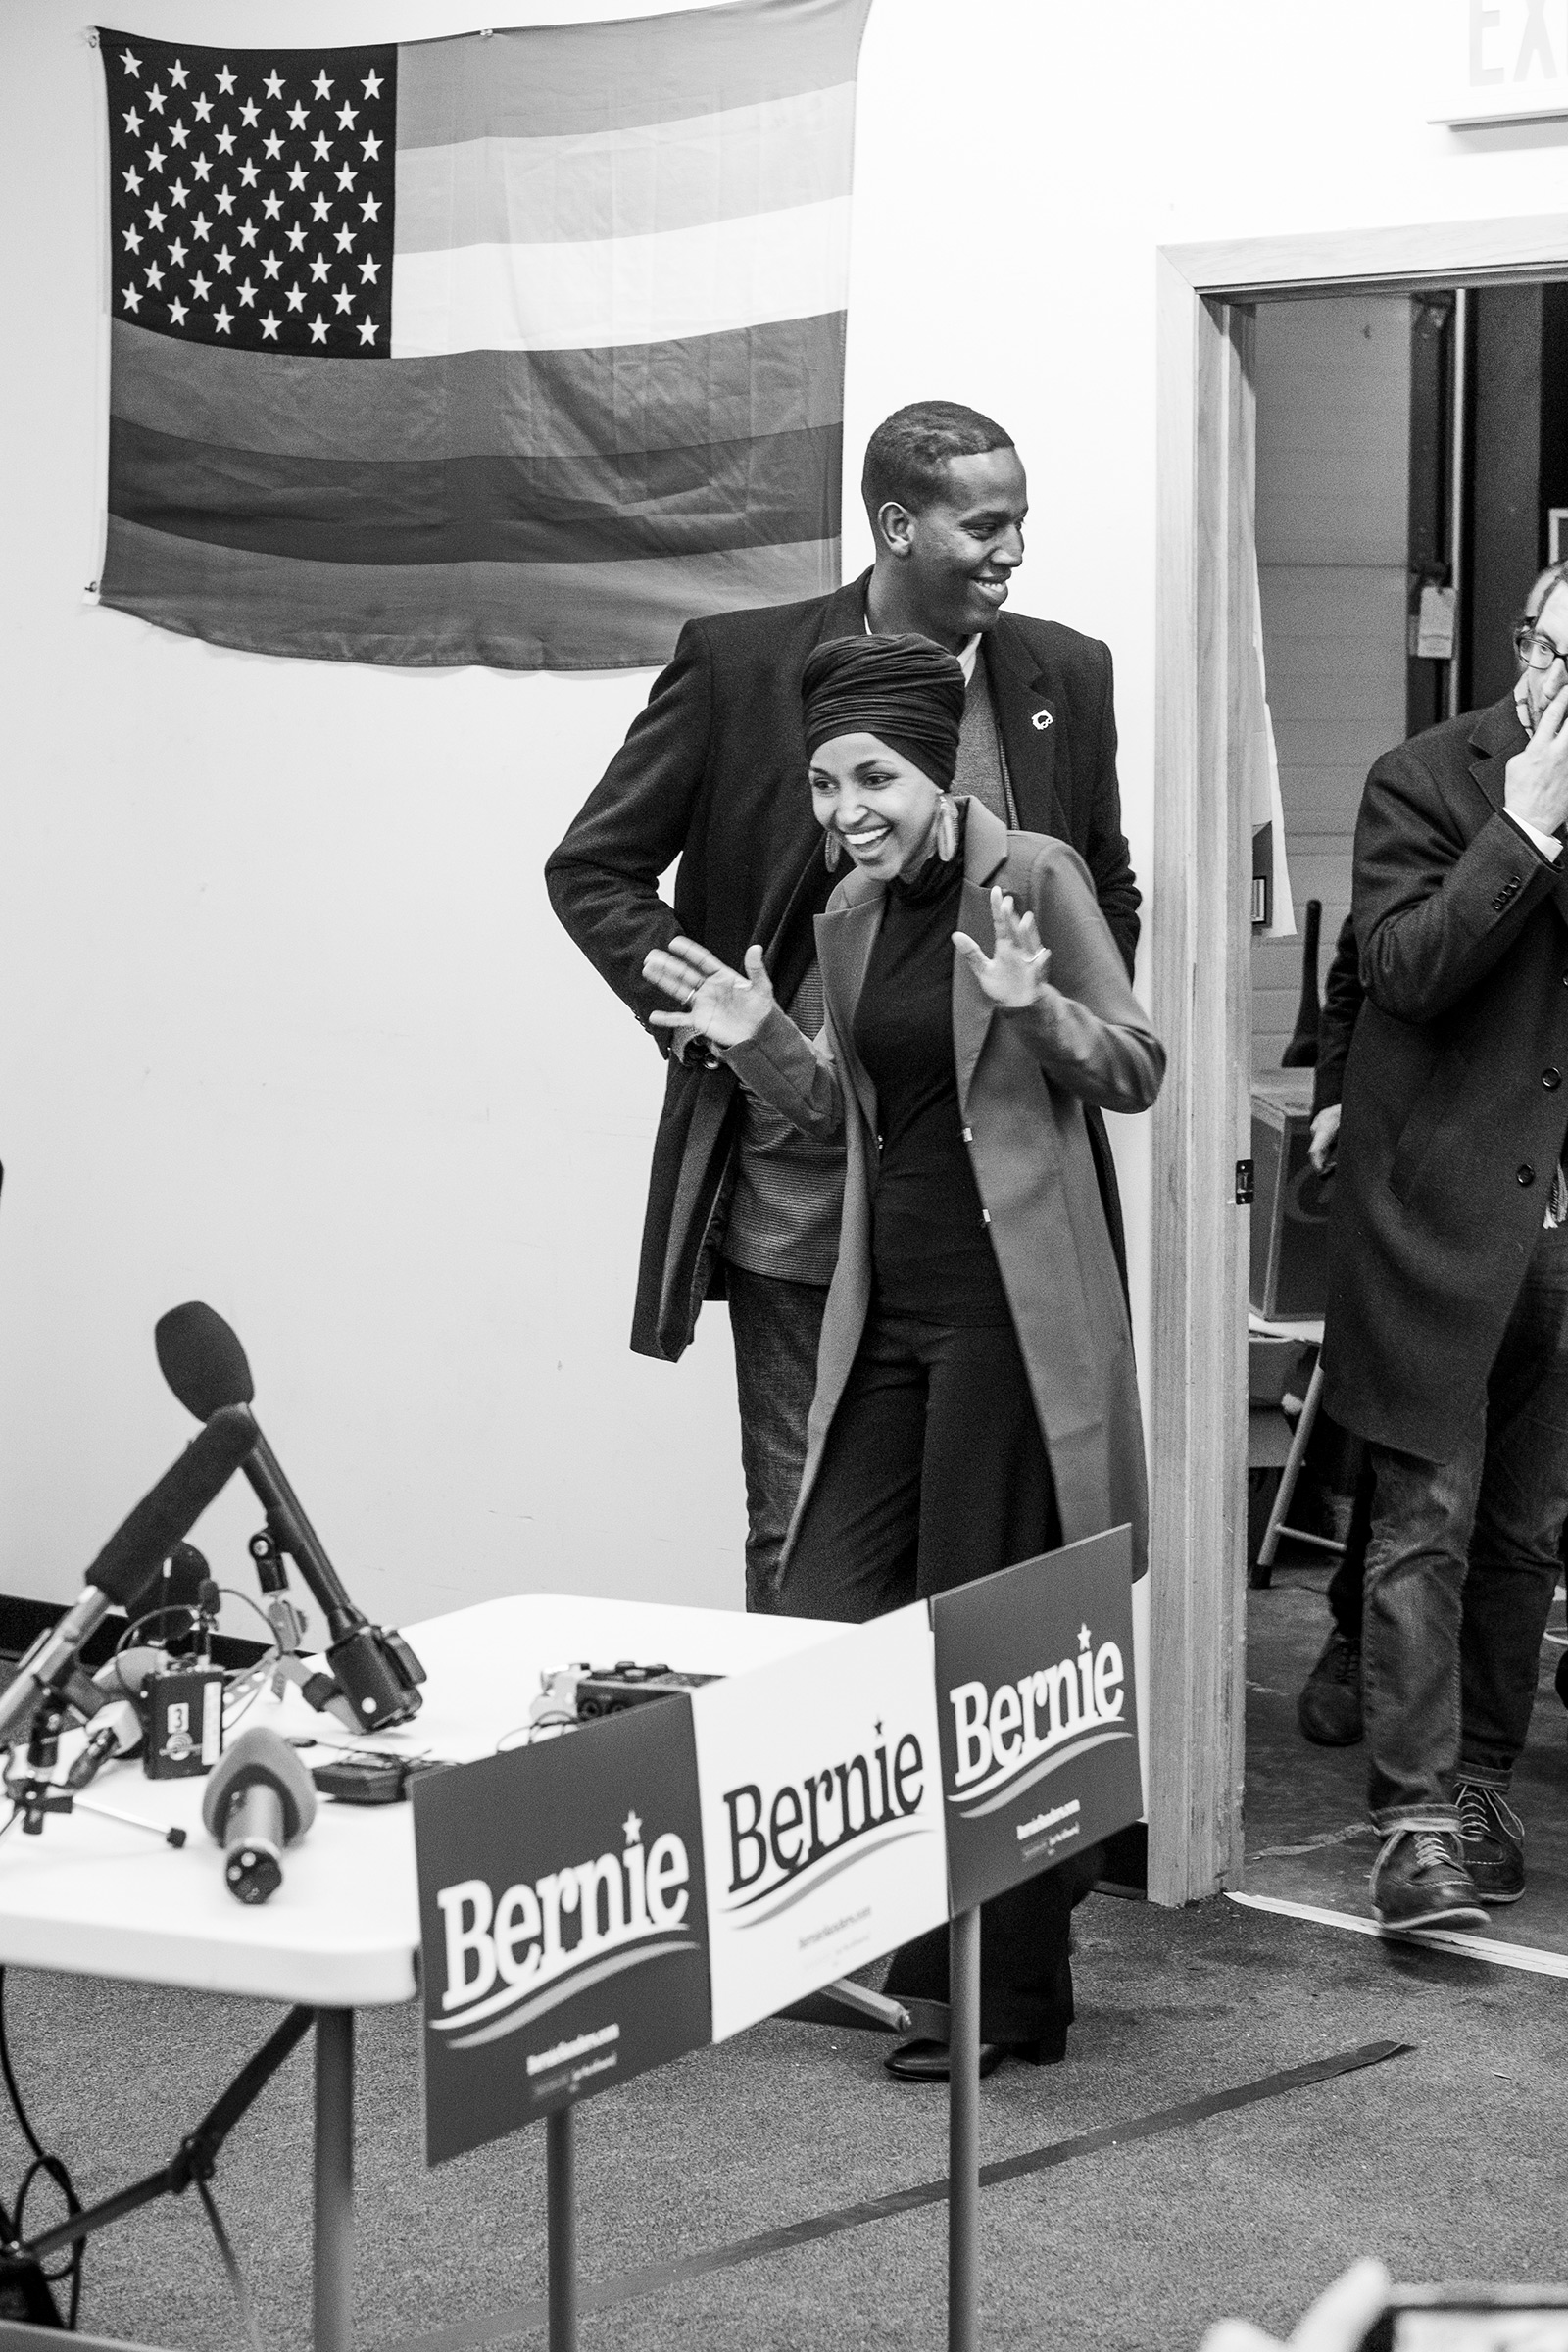 aunch at the Bernie 2020 Des Moines Field Office, Jan. 30, 2020. (Devin Yalkin for TIME L)